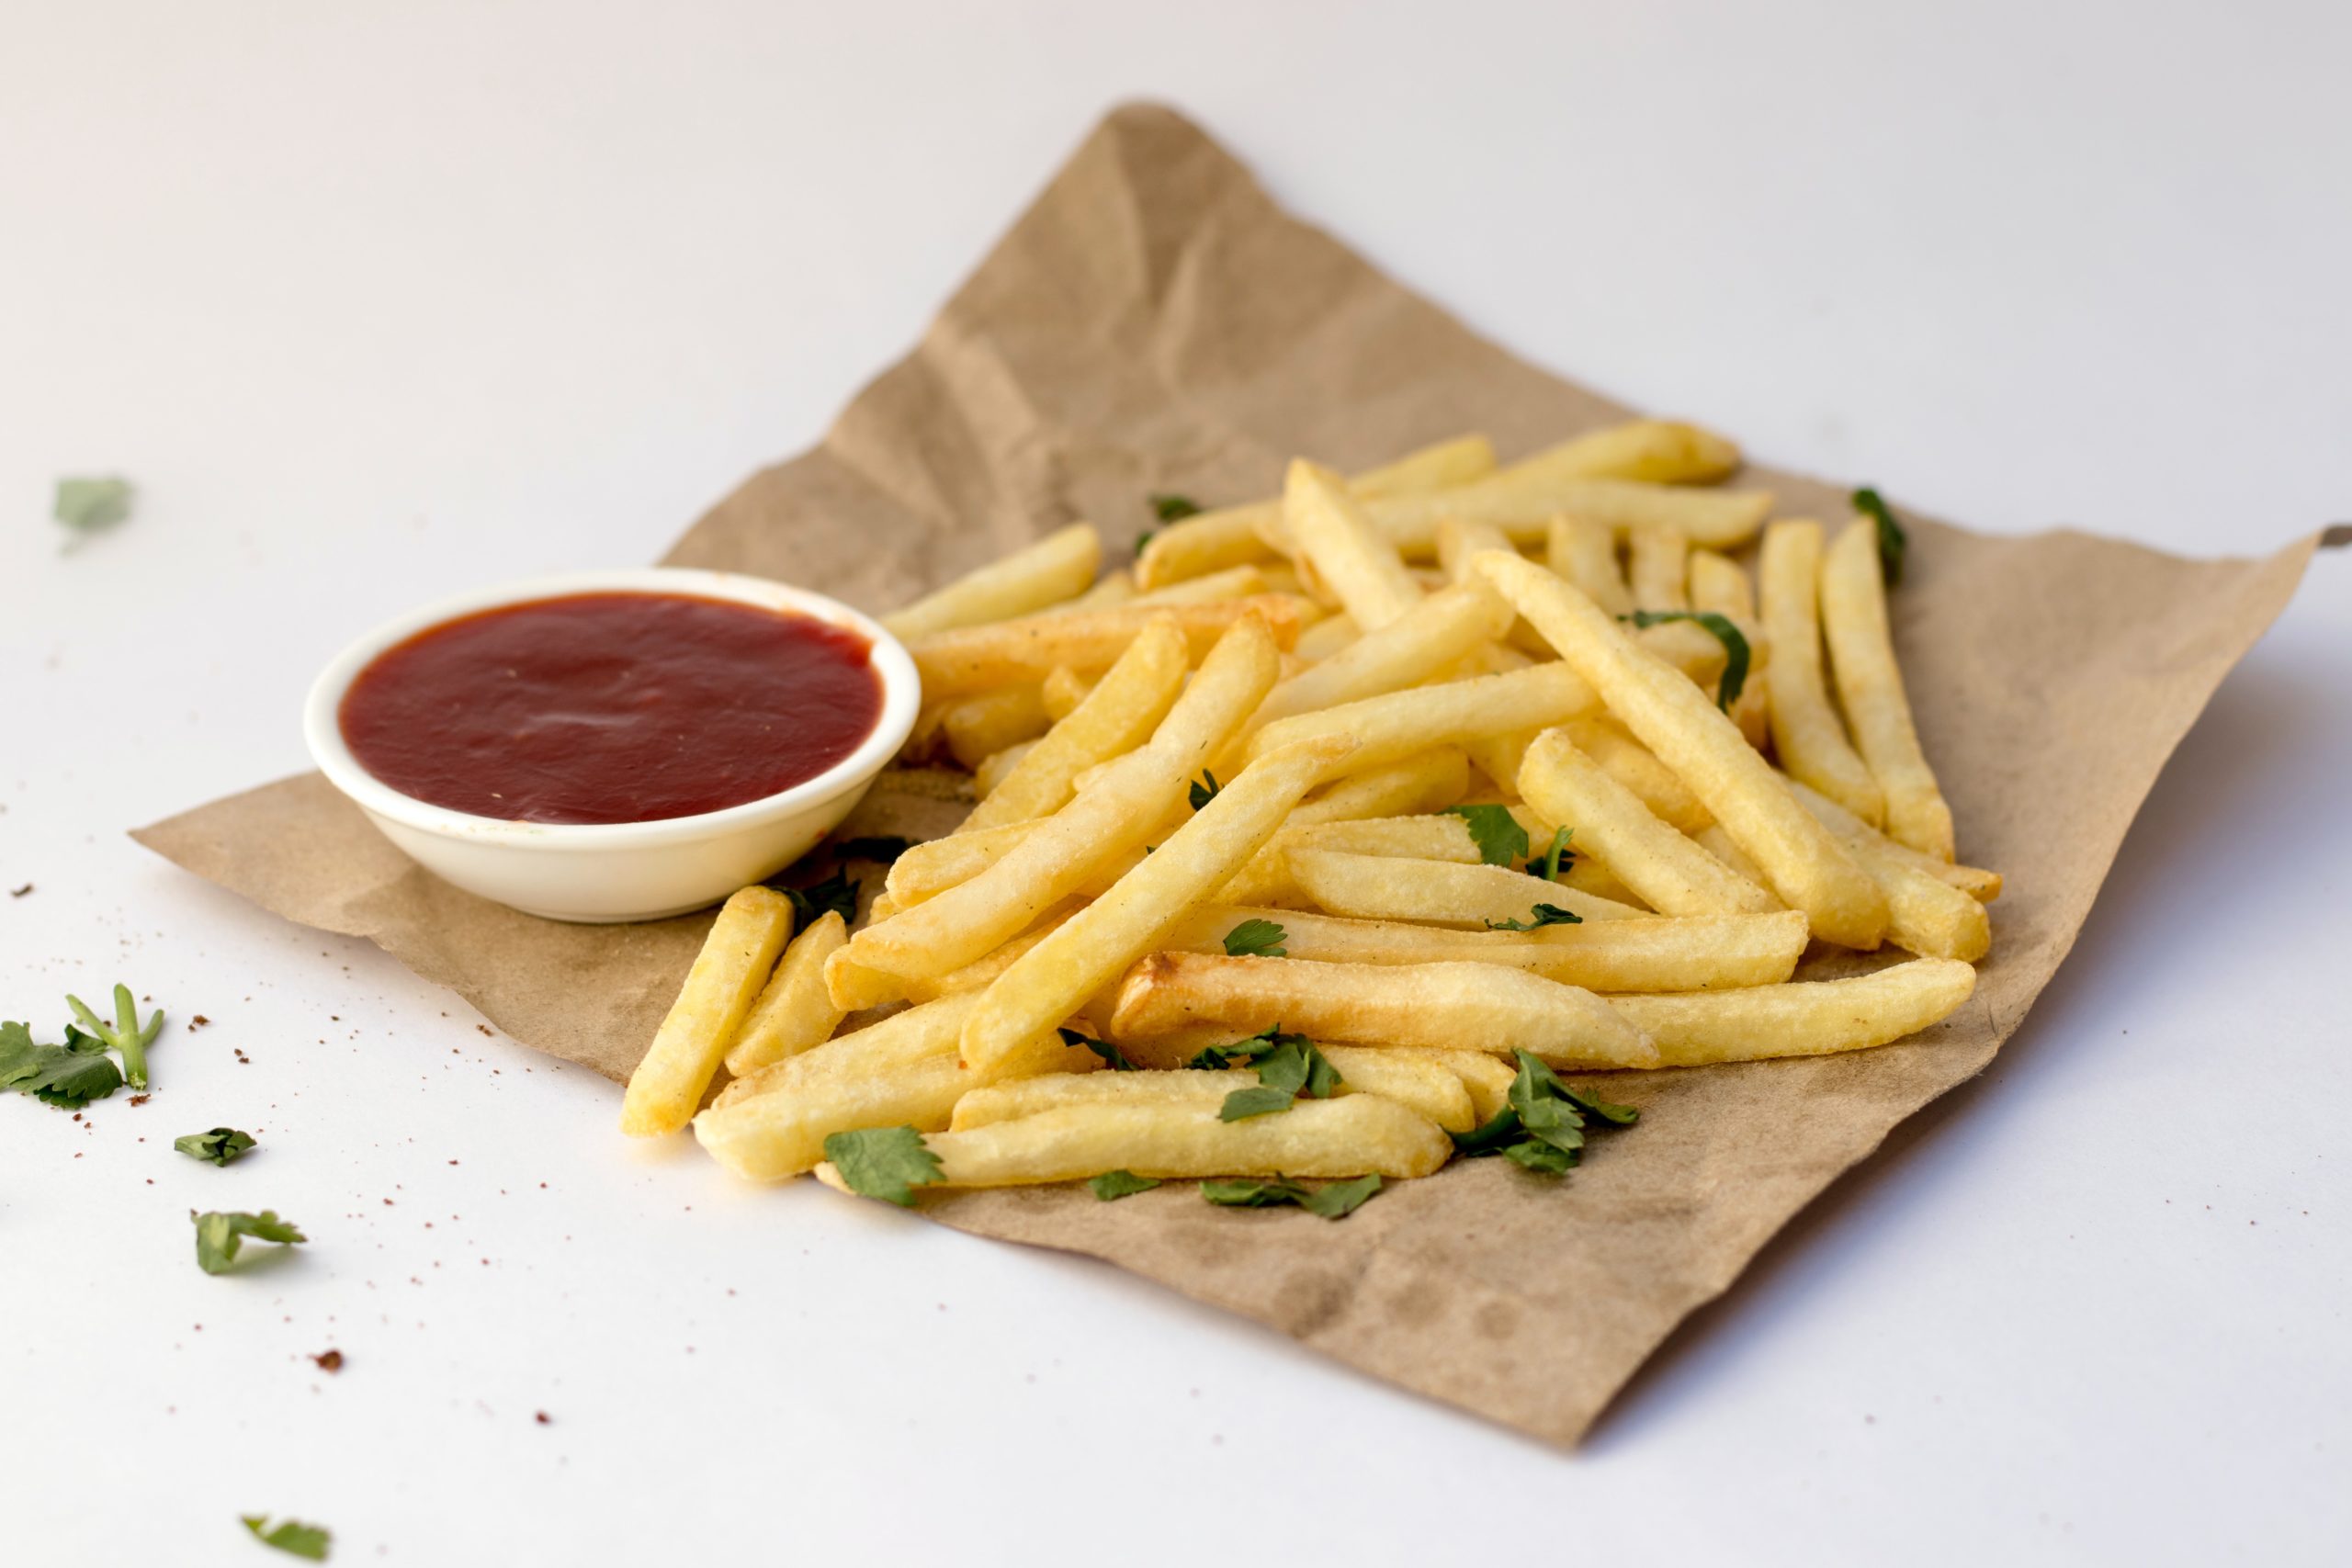 How are Frozen French Fries Made